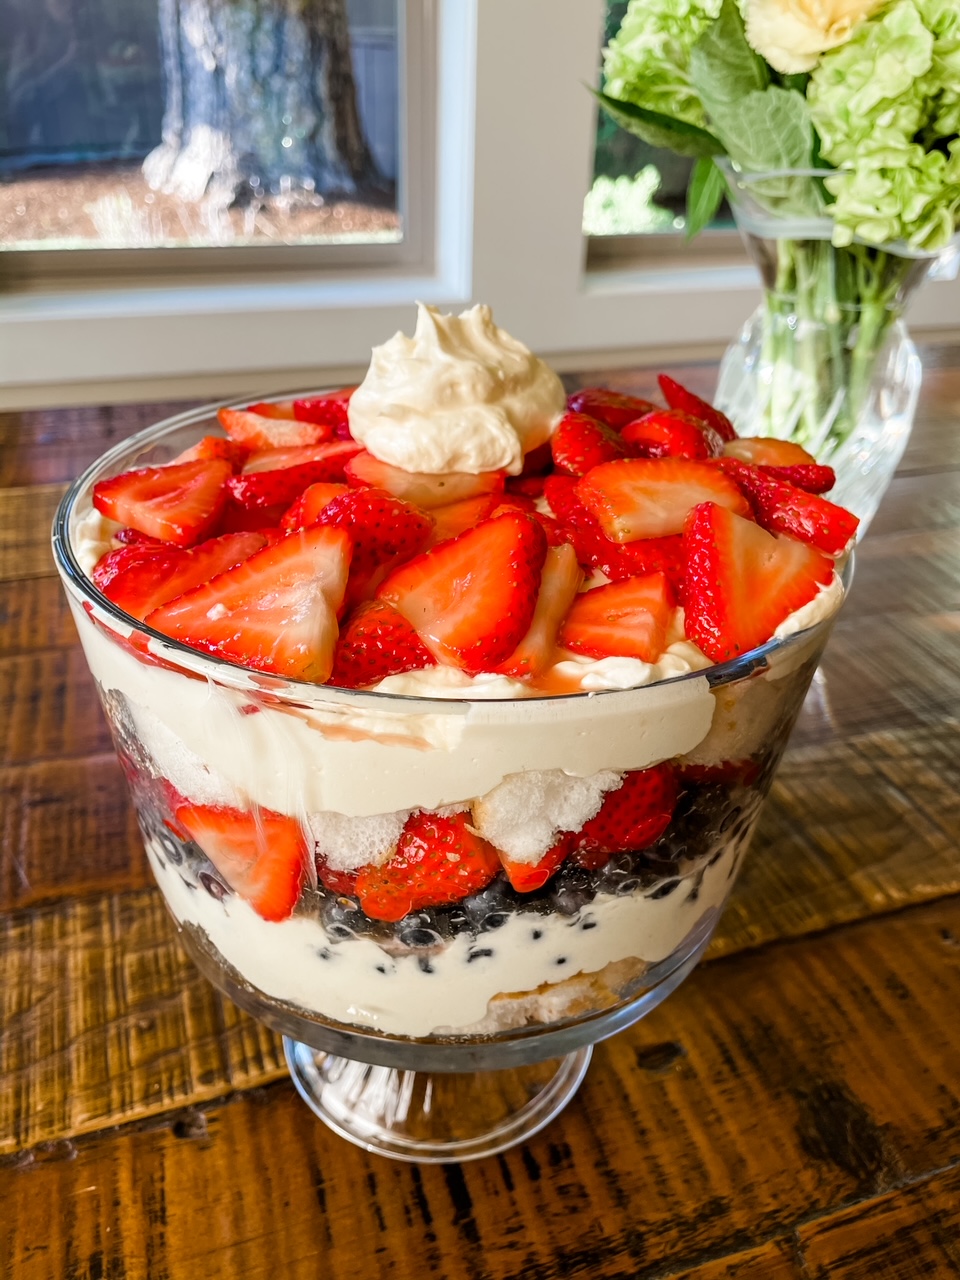 The finished Easy Berry Trifle with Lemon Filling